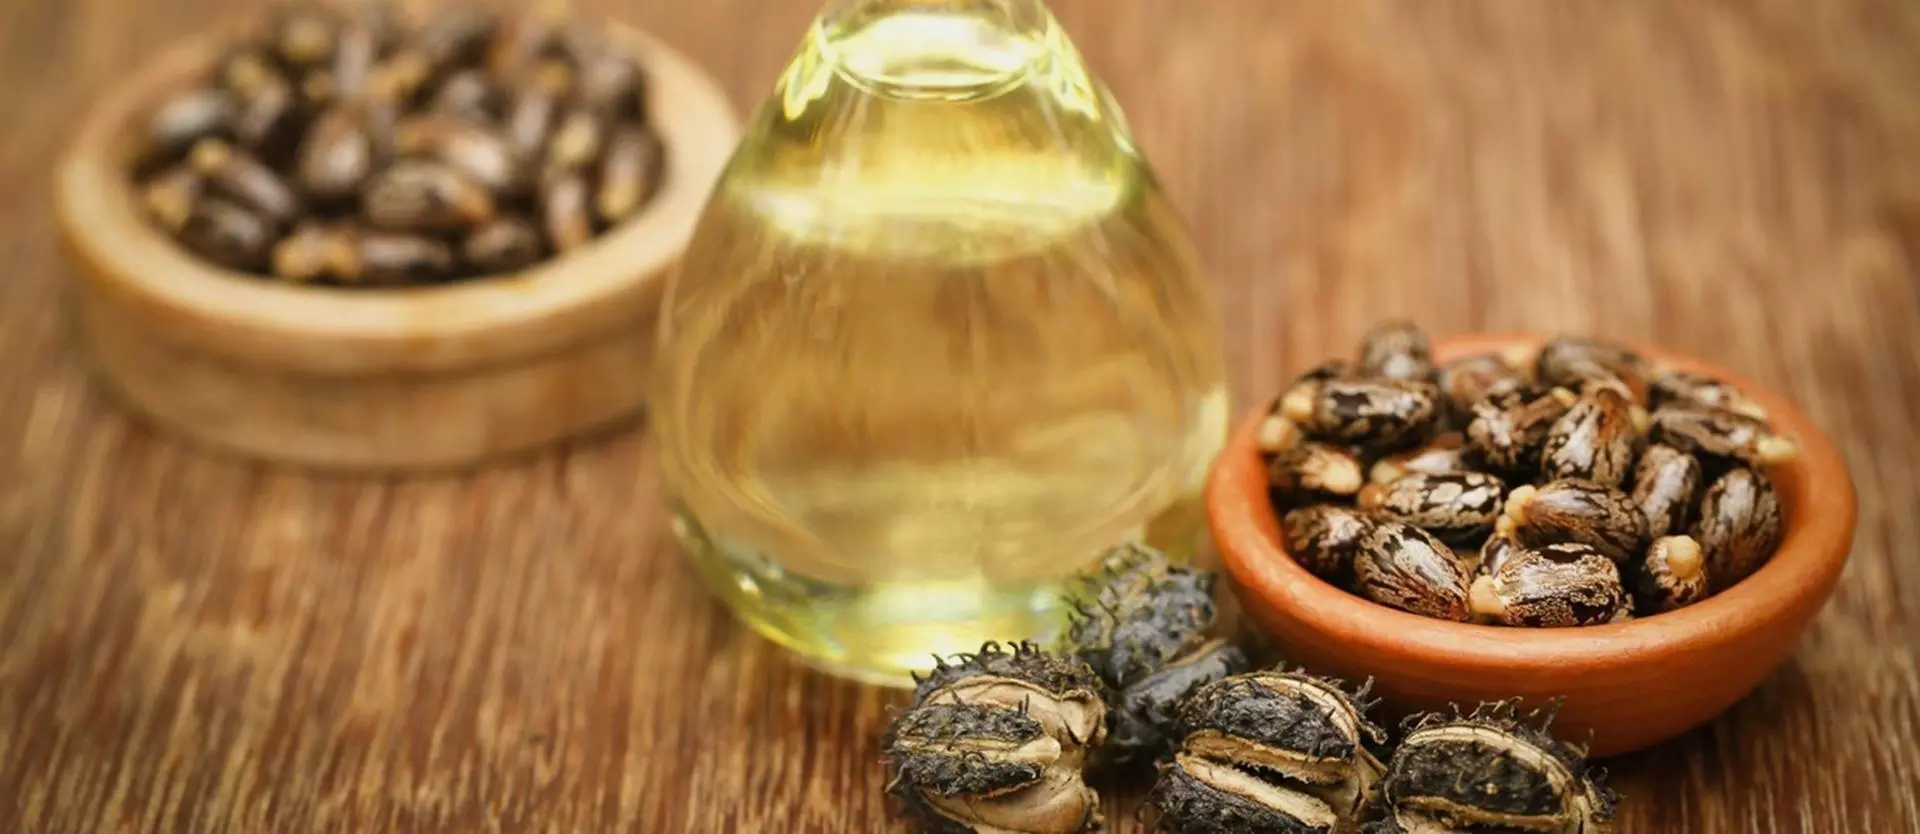 Can Castor Oil Help with Hair Loss?